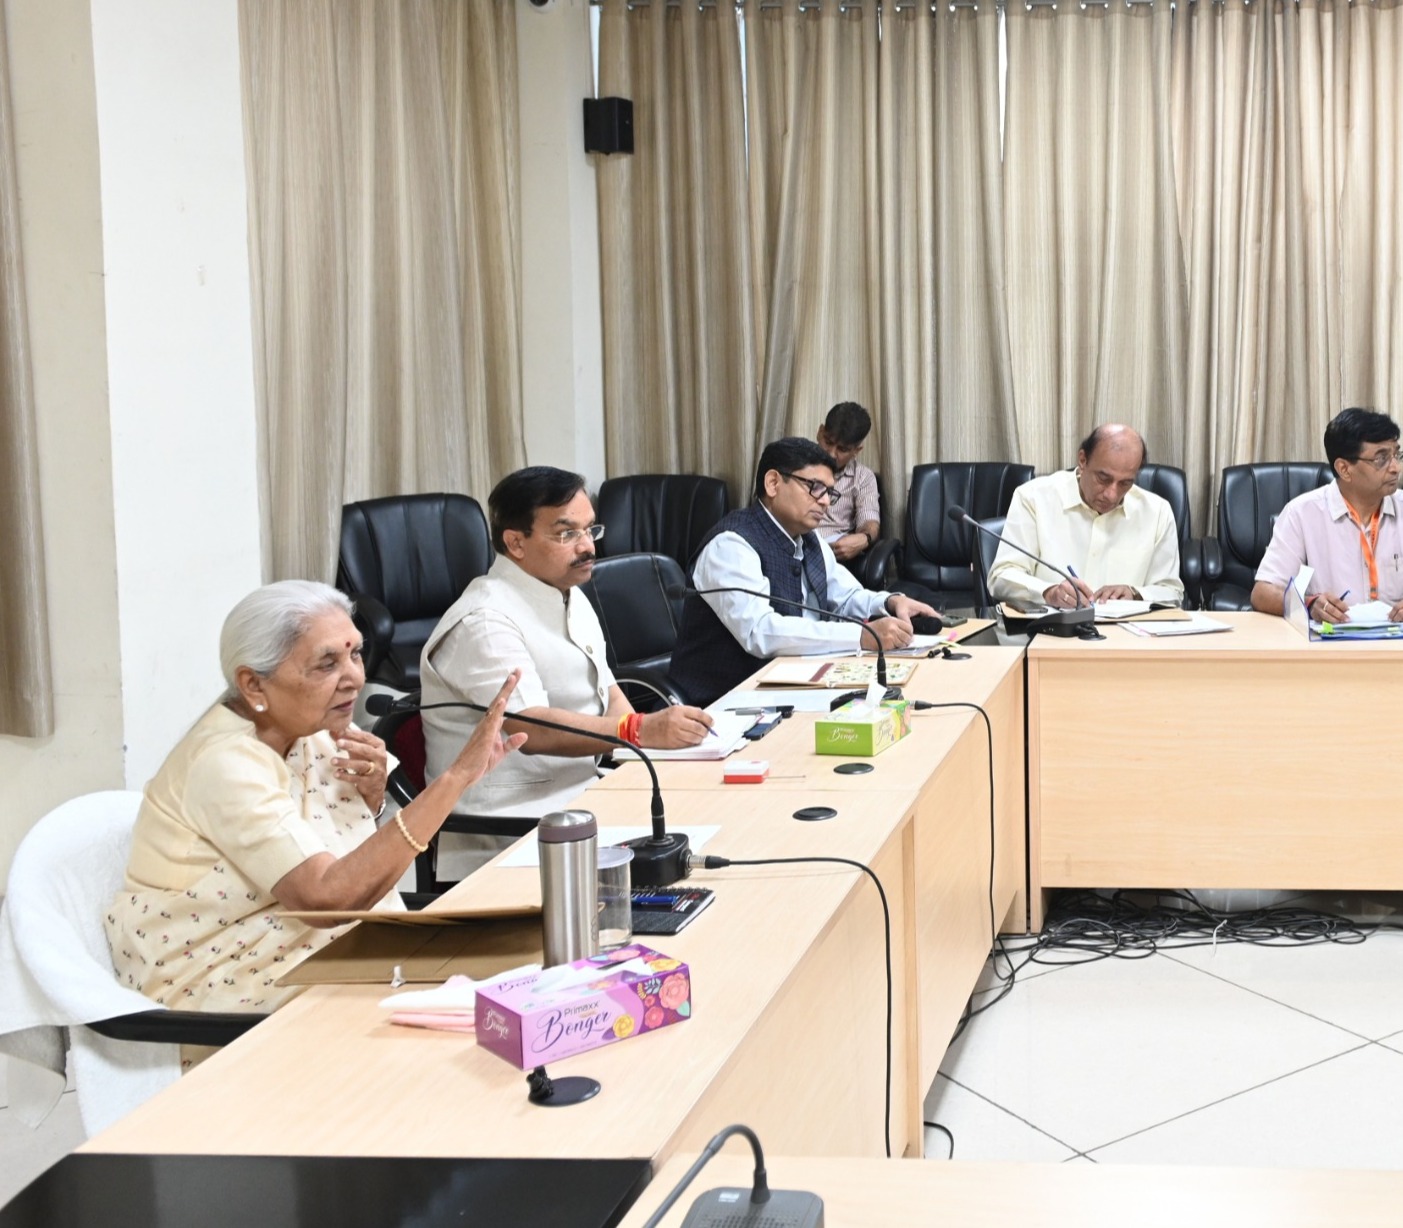 Review meeting of Dr. A.P.J. Abdul Kalam Technical University, Lucknow concluded under the chairmanship of the Governor.